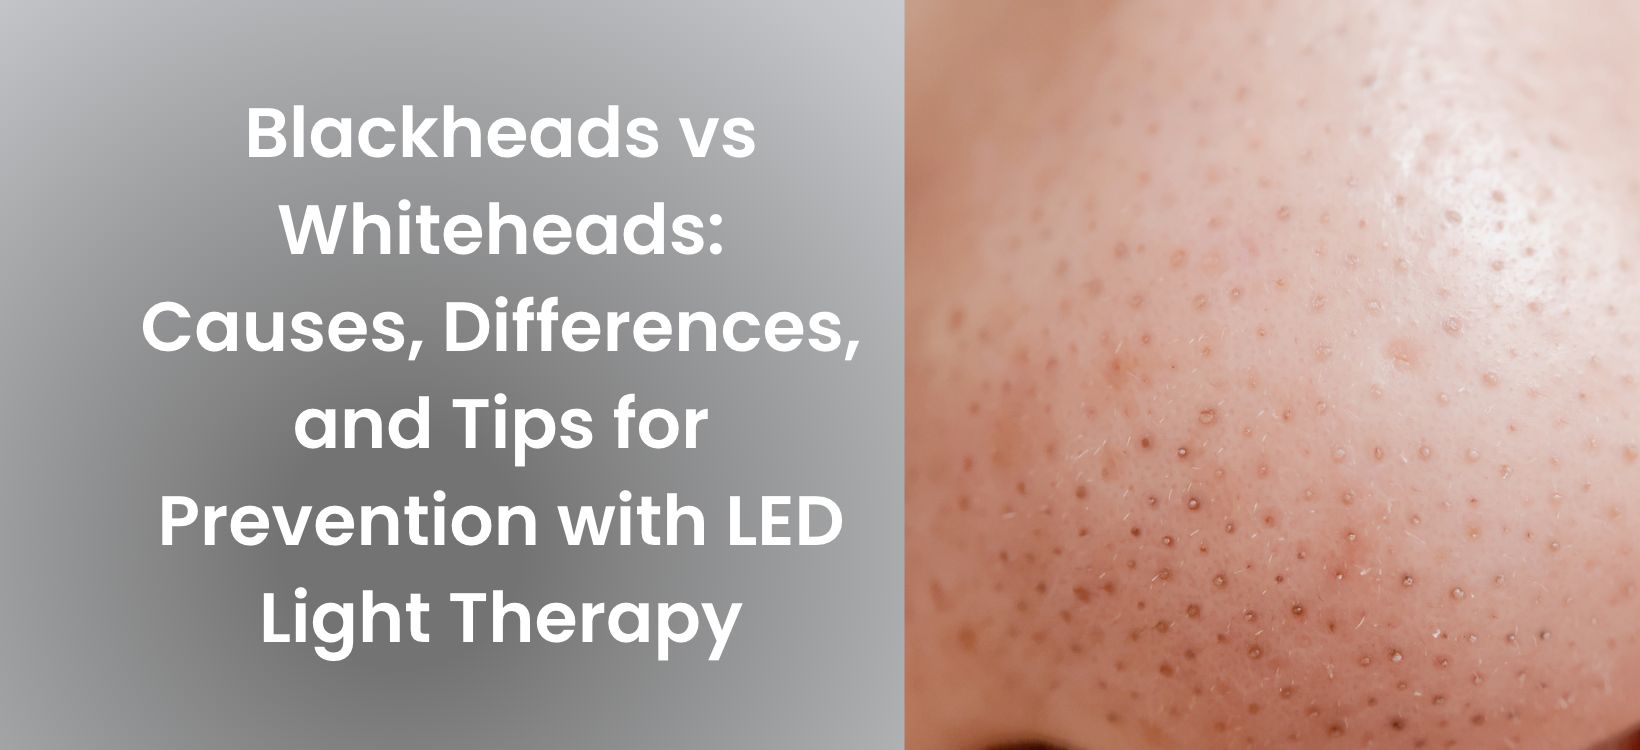 Blackheads vs Whiteheads: Causes, Differences, and Tips for Prevention with Led Light Therapy